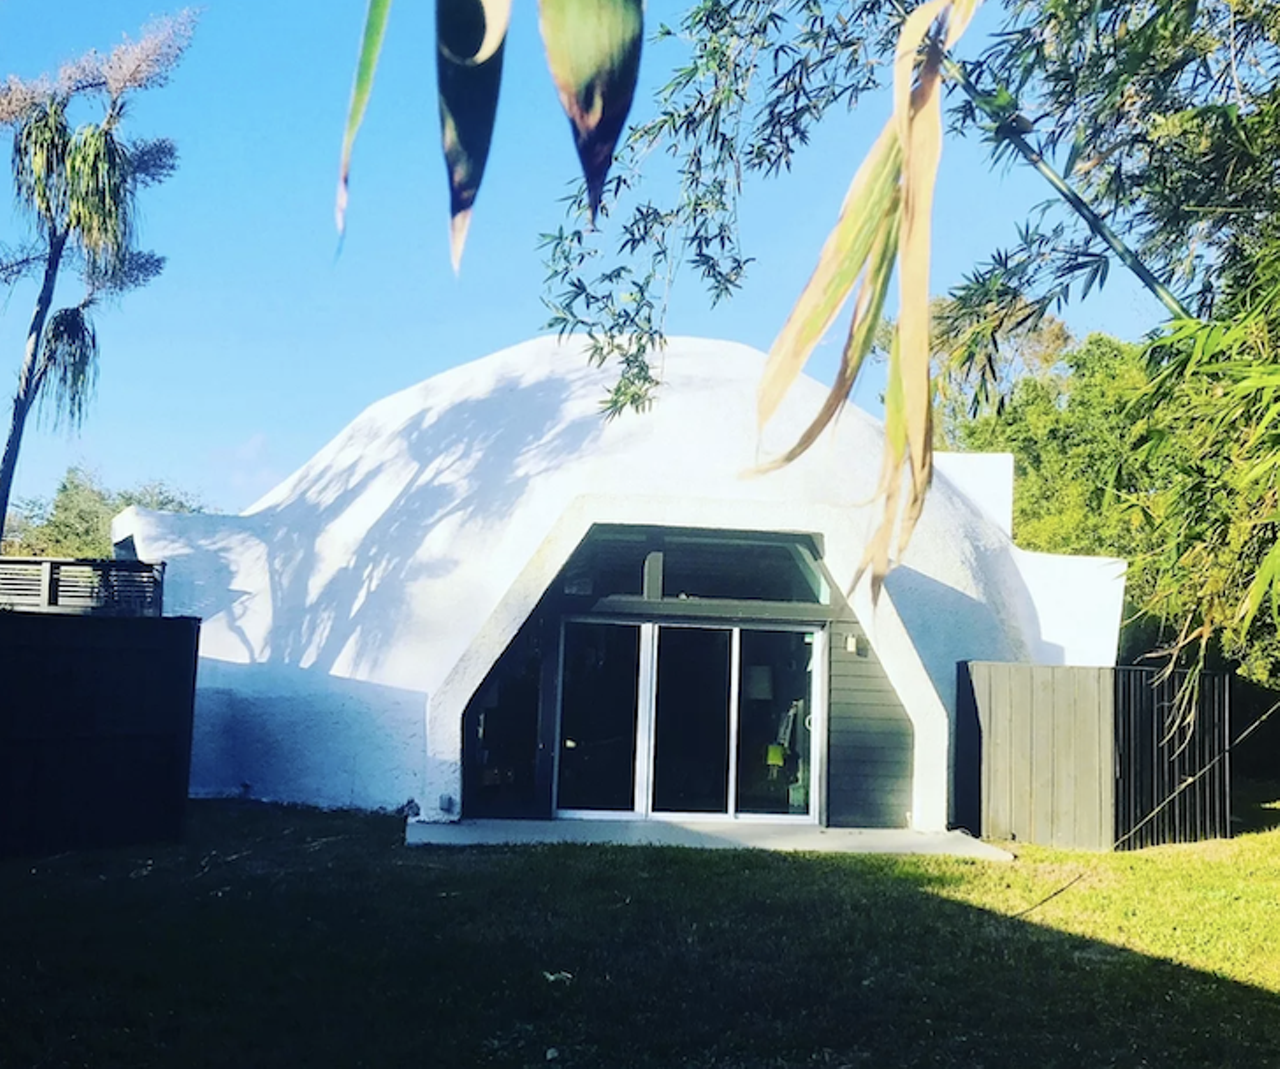 A rare and award-winning 'dome home' is back on the market in St. Pete